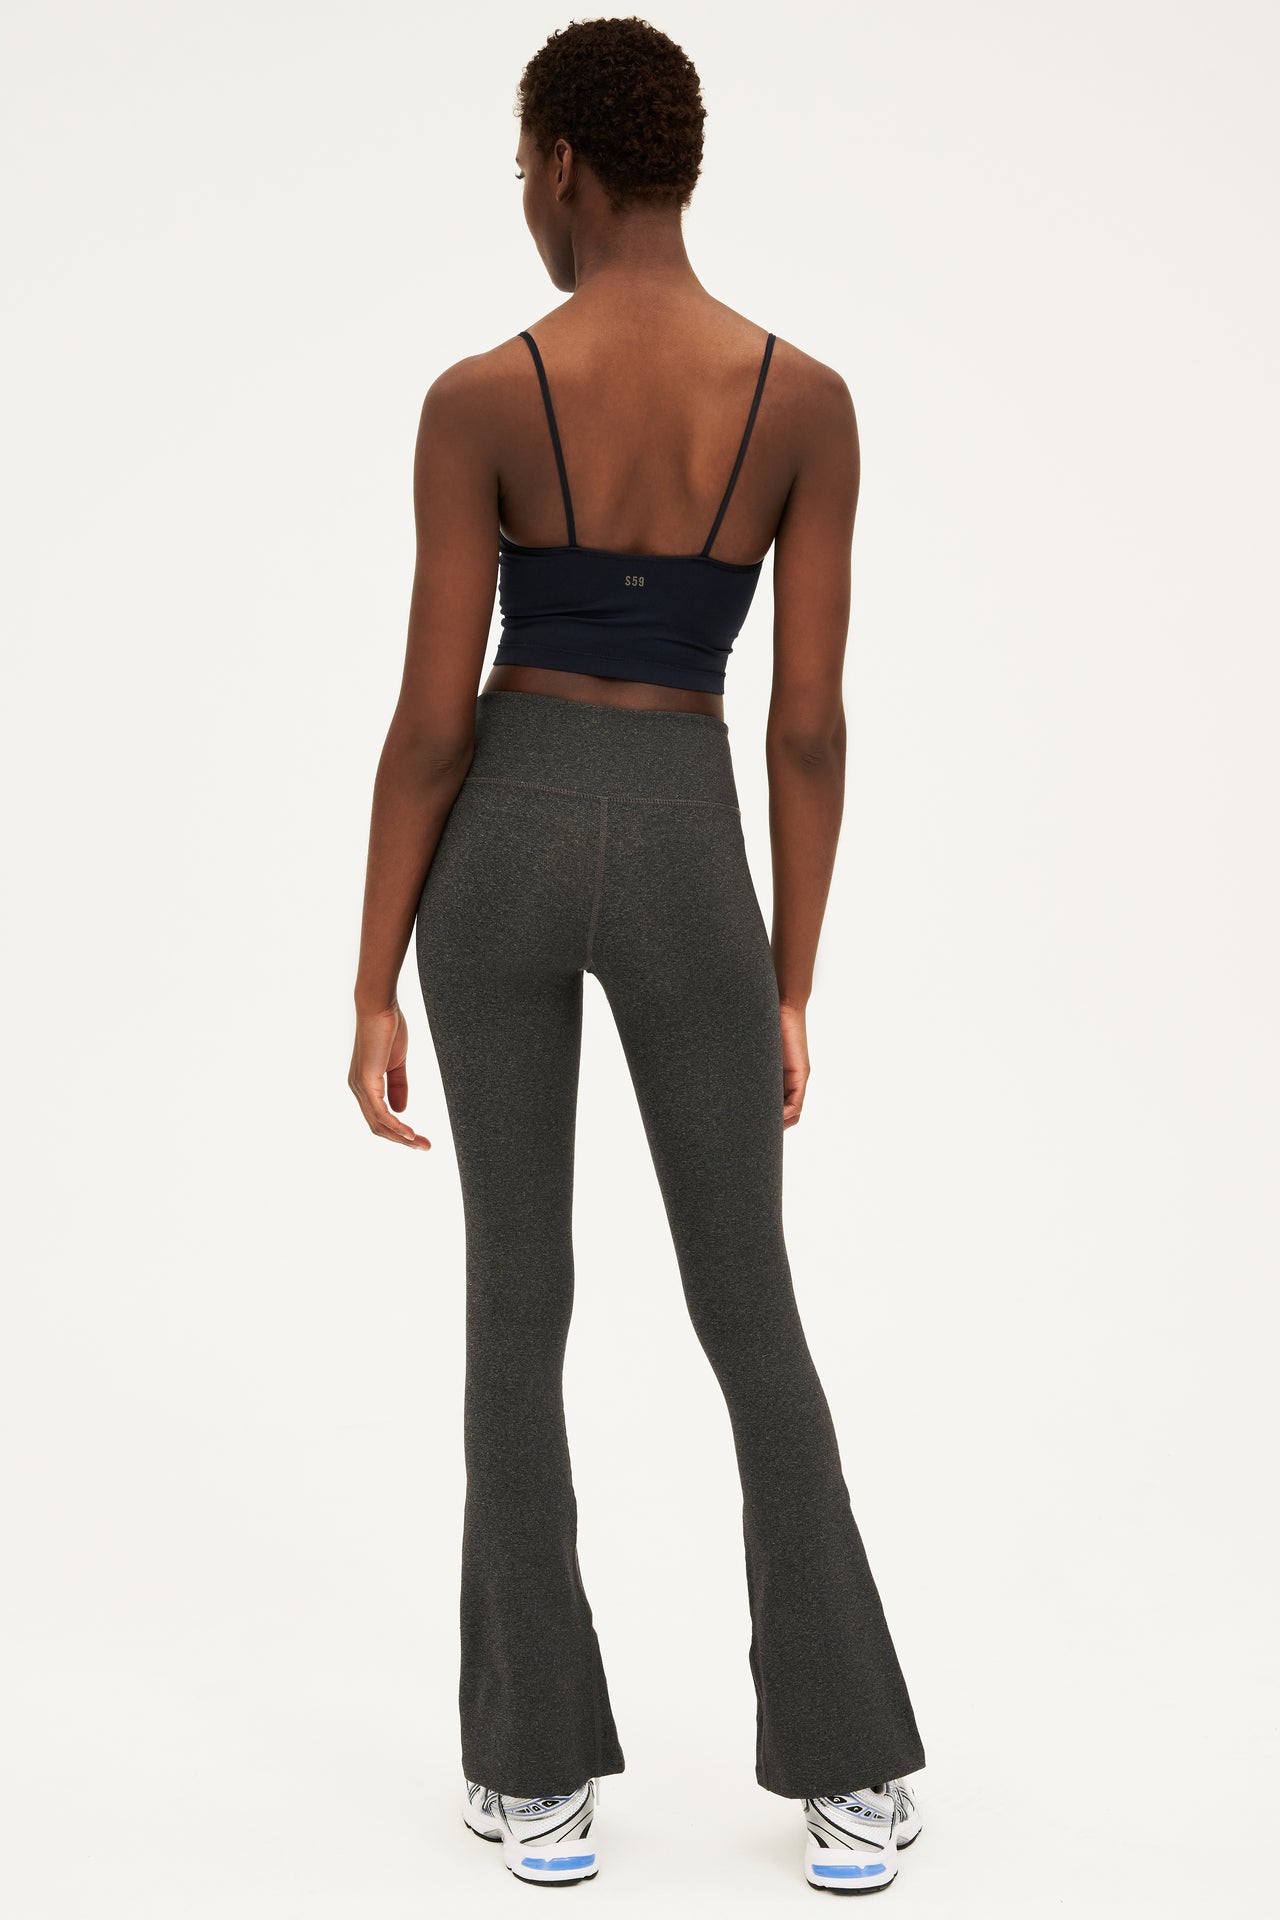 The back view of a woman wearing SPLITS59 Raquel Flared Legging in Heather Grey made from 4-way stretch fabric.